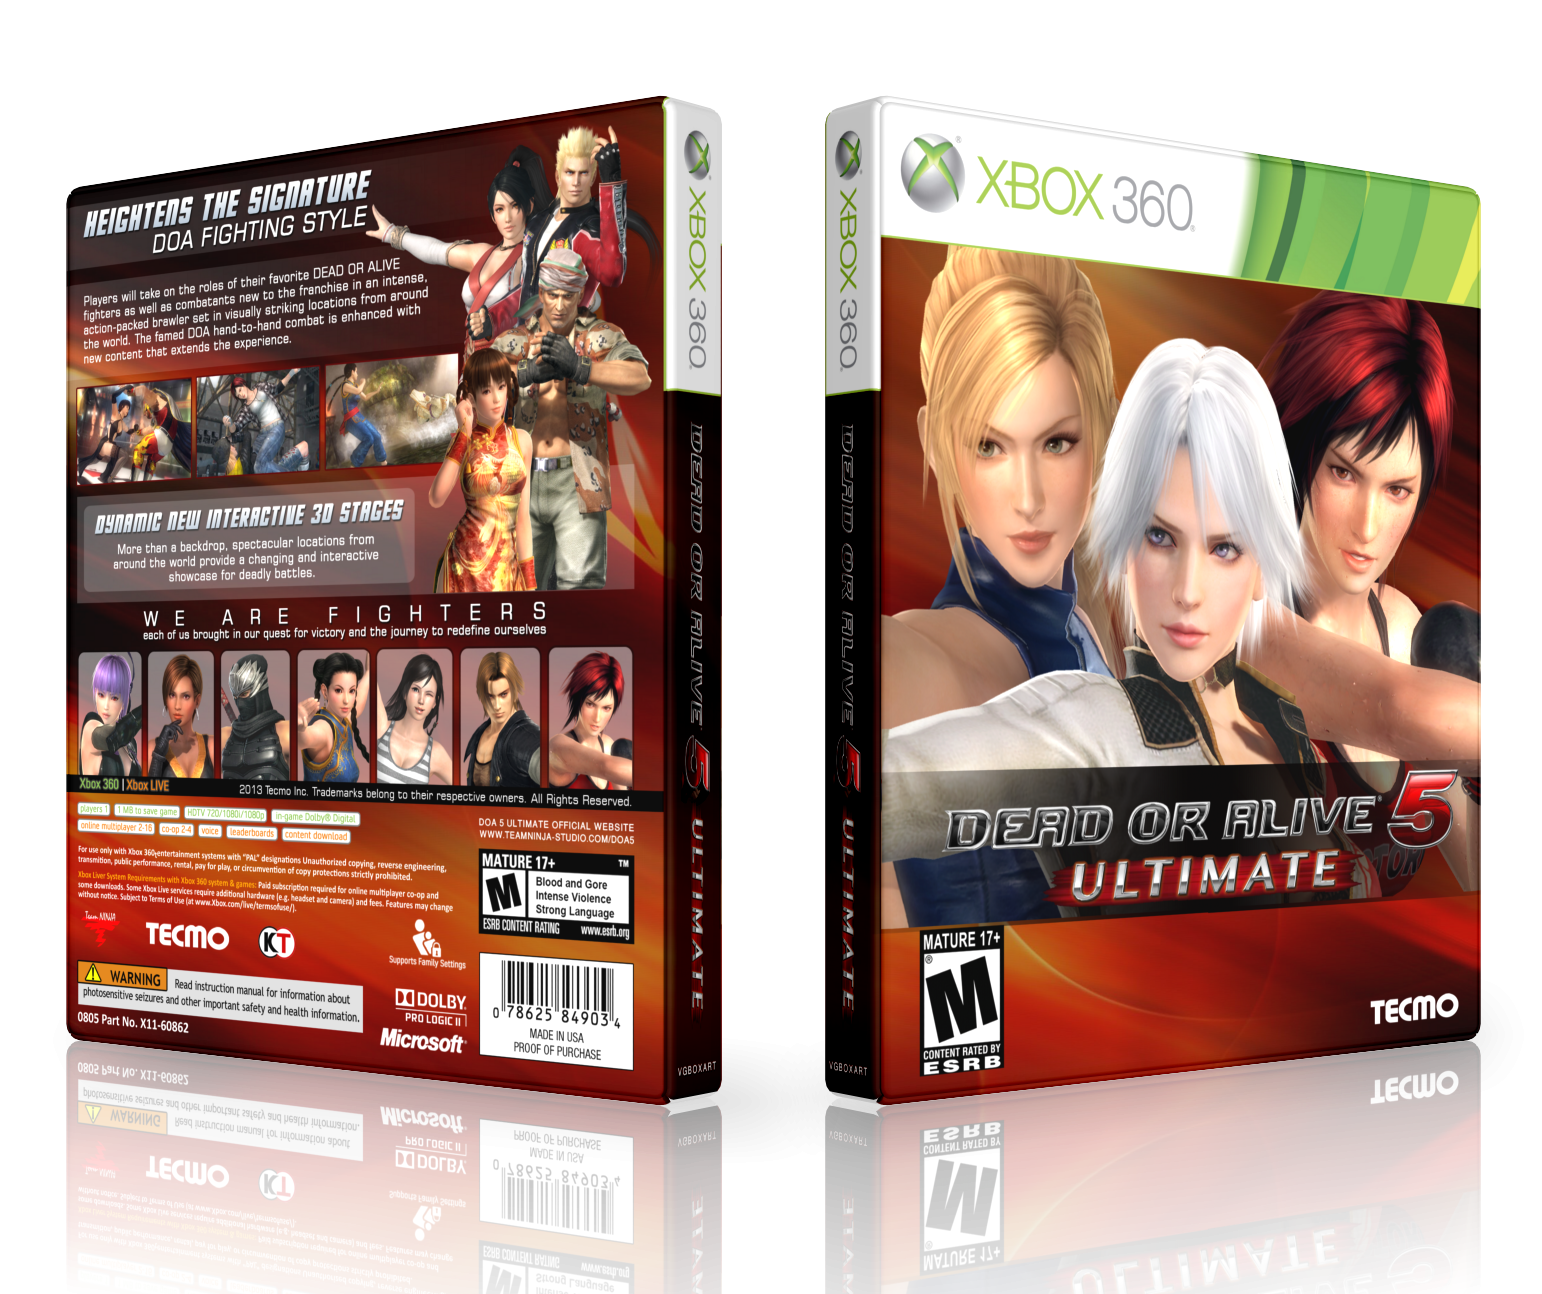 Viewing full size Dead or Alive 5 Ultimate box cover